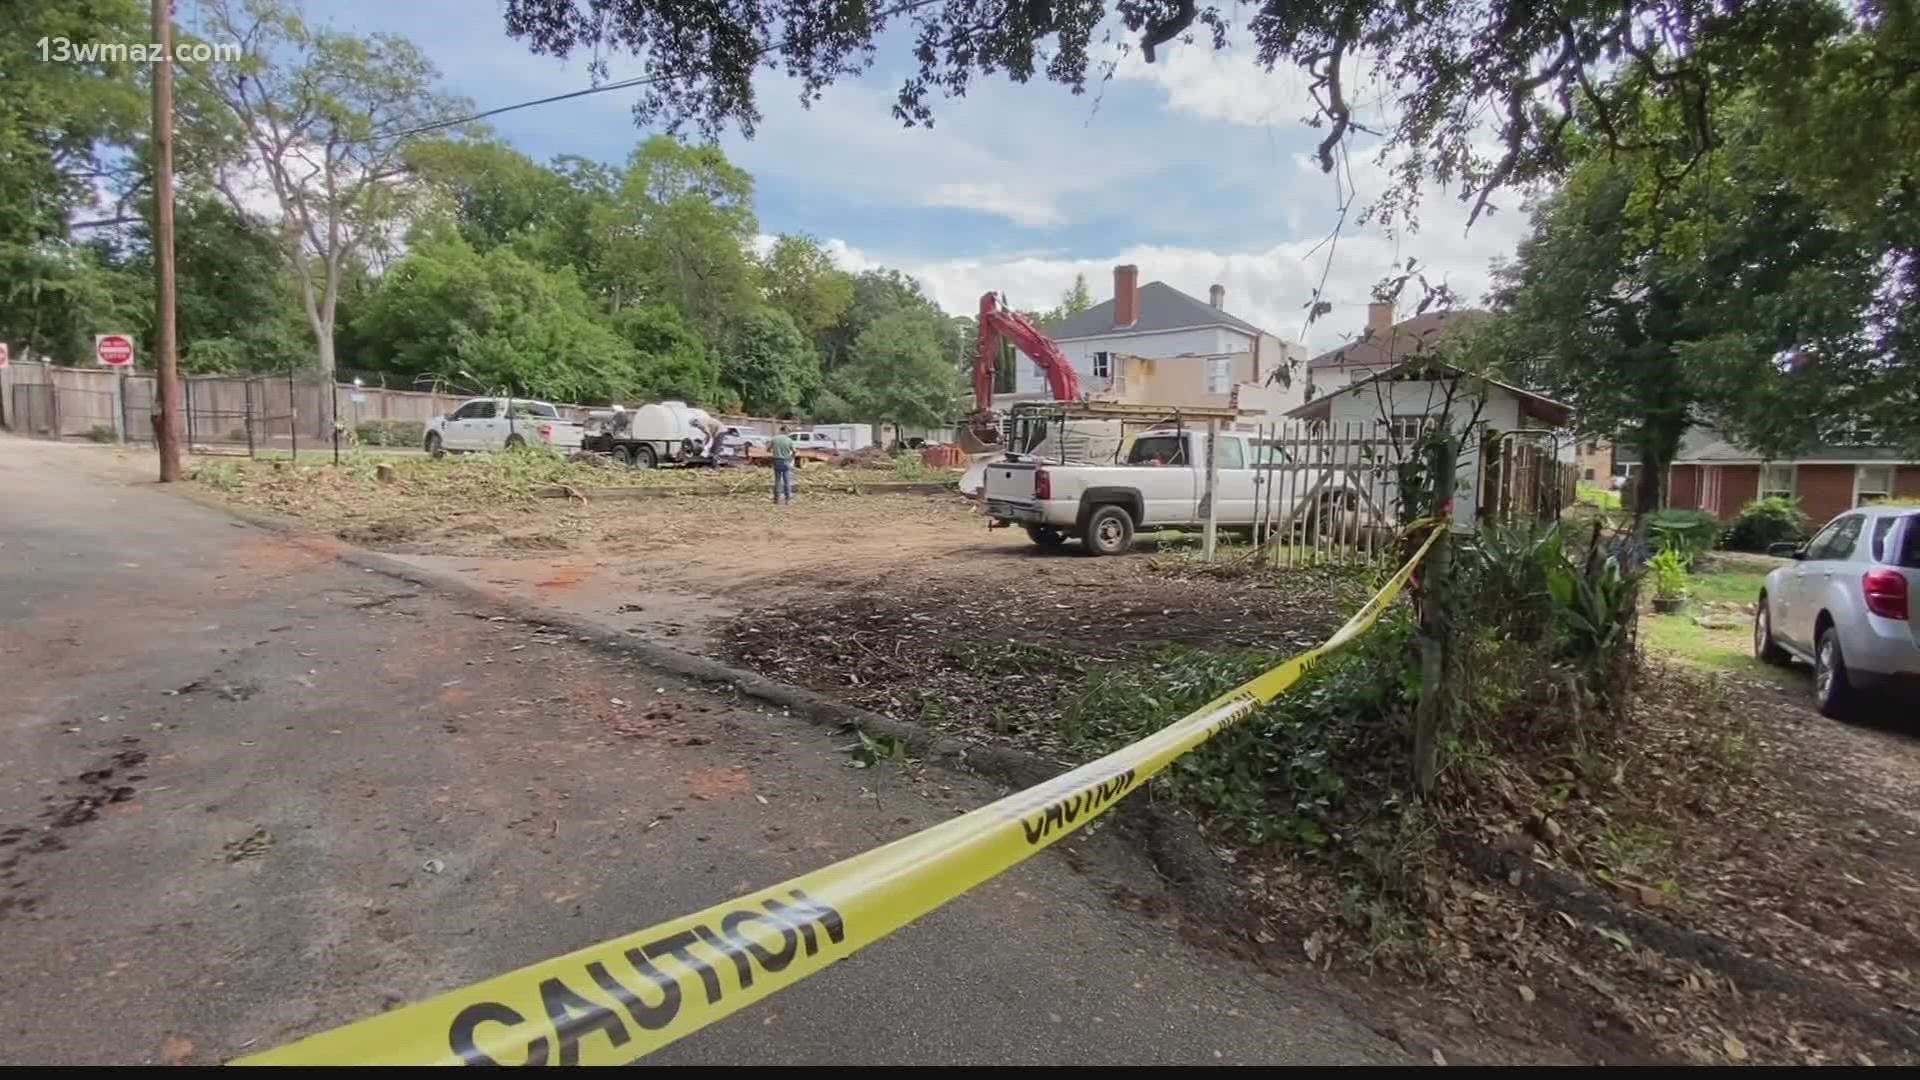 Vineville neighbors woke up to the sounds of demolition this week and questioned what was happening.